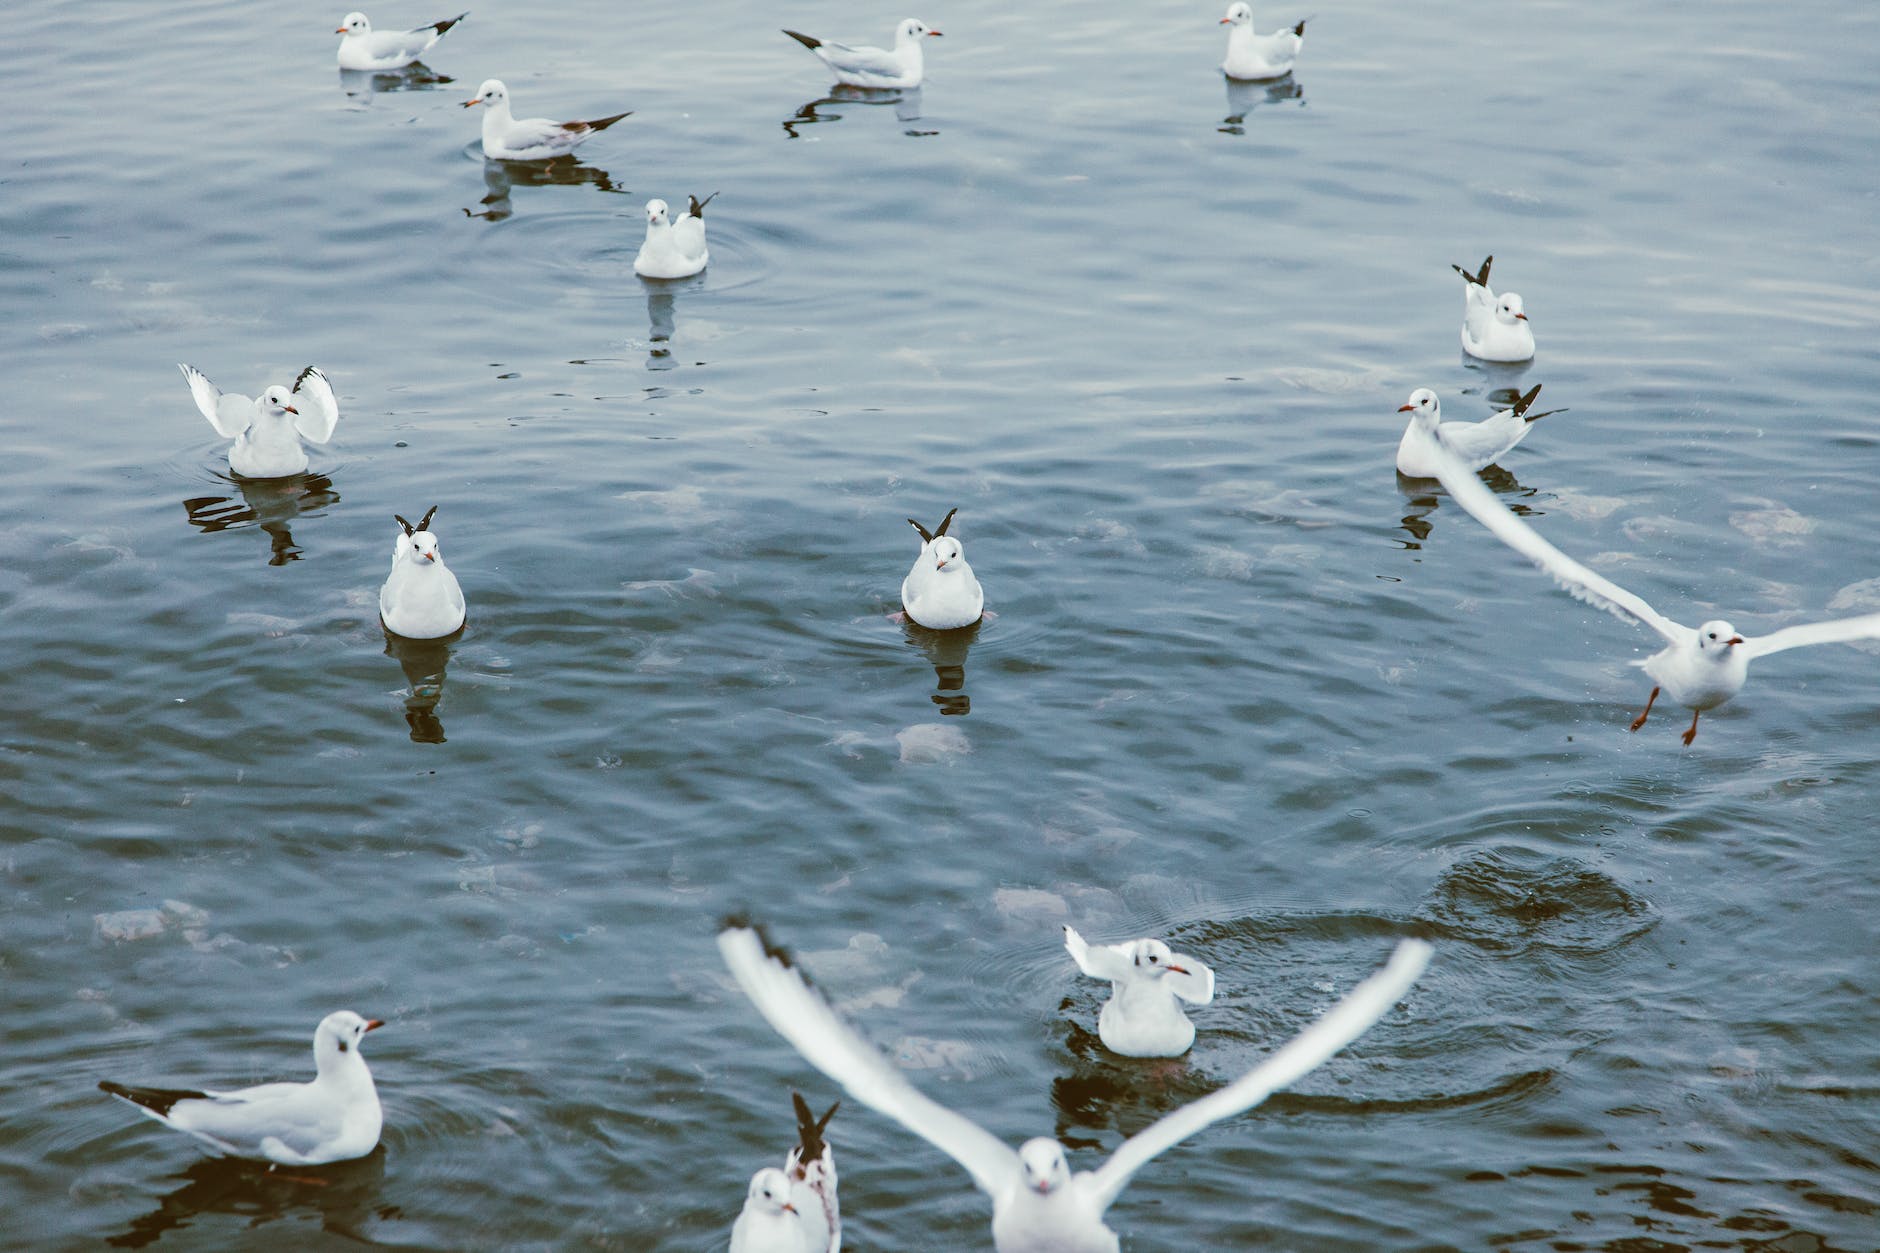 silver gulls on the sea surface